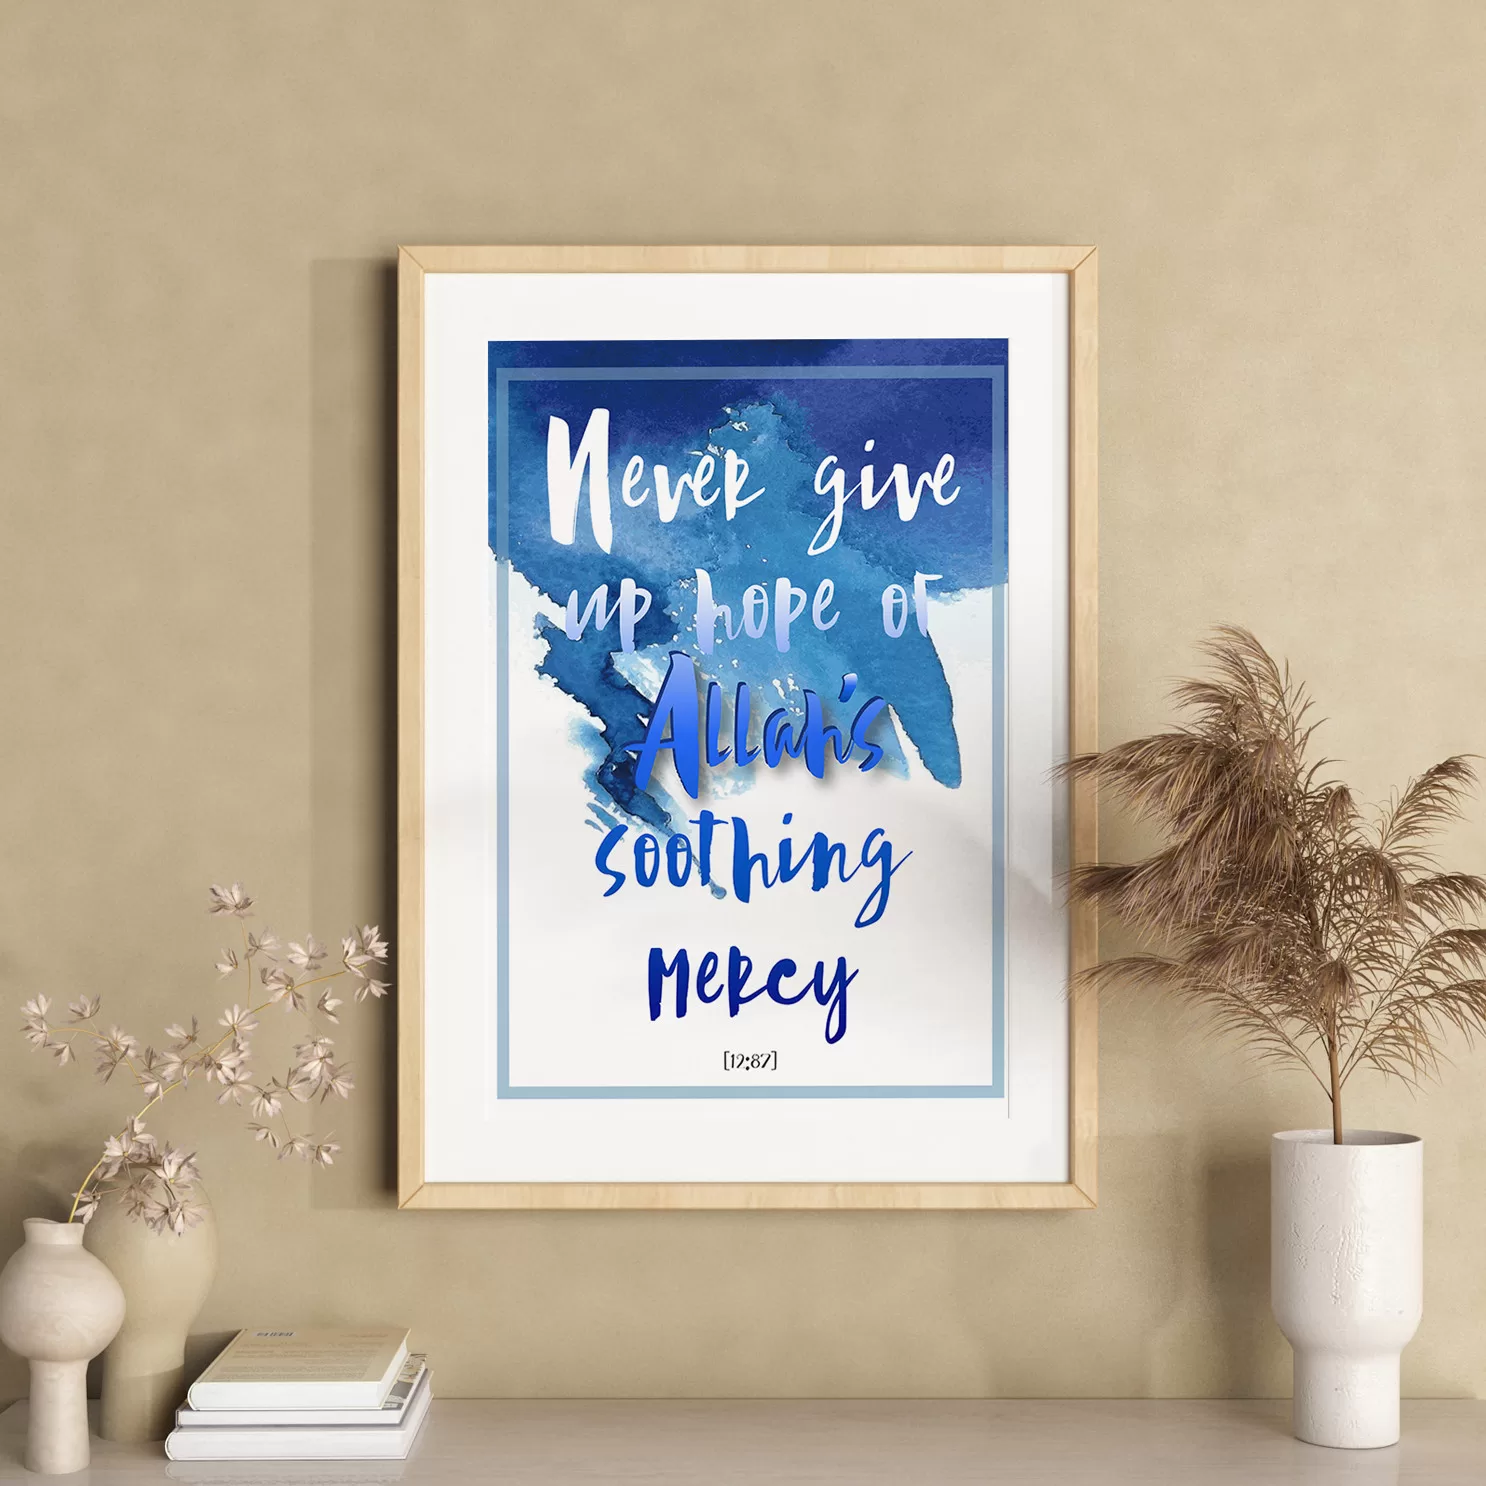 Surah Yousuf Ayaat 87 English Frame (Never Give Up Hope of Allah's Soothing Mercy) - The Sunnah Store